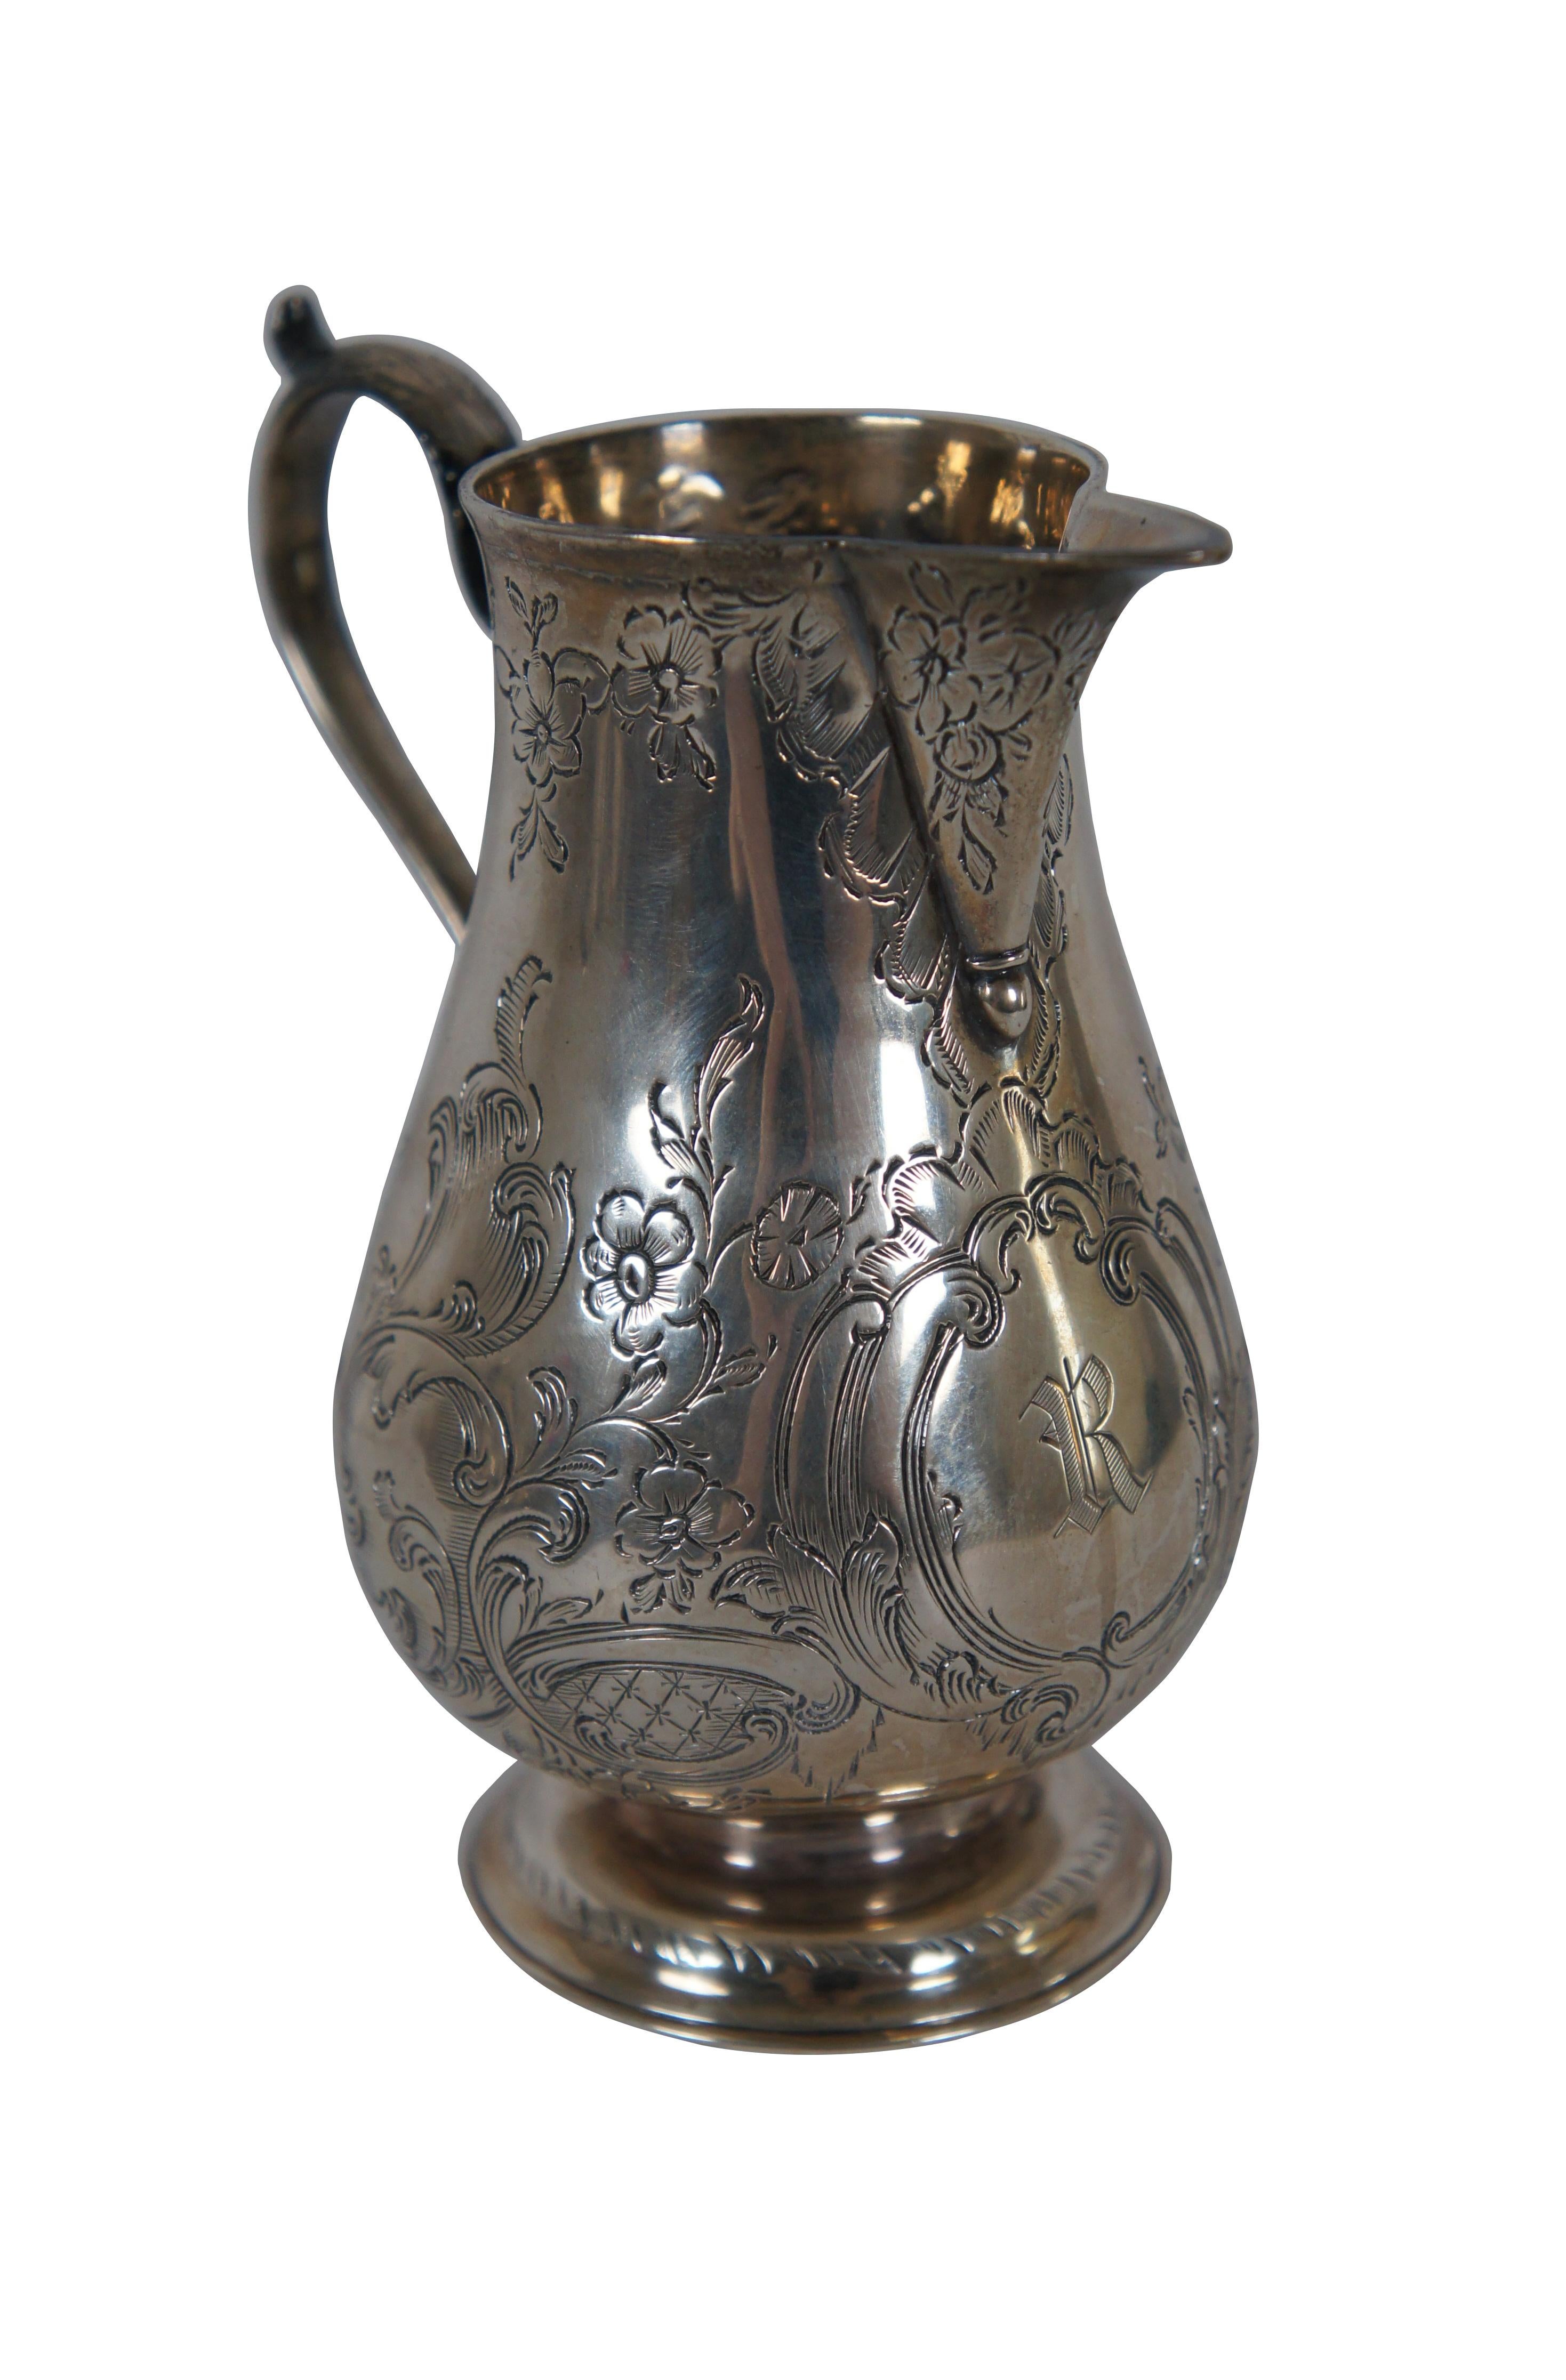 Antique Victorian era sterling silver cream pitcher, etched with swirling leaves and flowers. Monogrammed with the initial R. Made in 1851 by London silversmith George Frederick Pinnell. Weight 186.2 g.